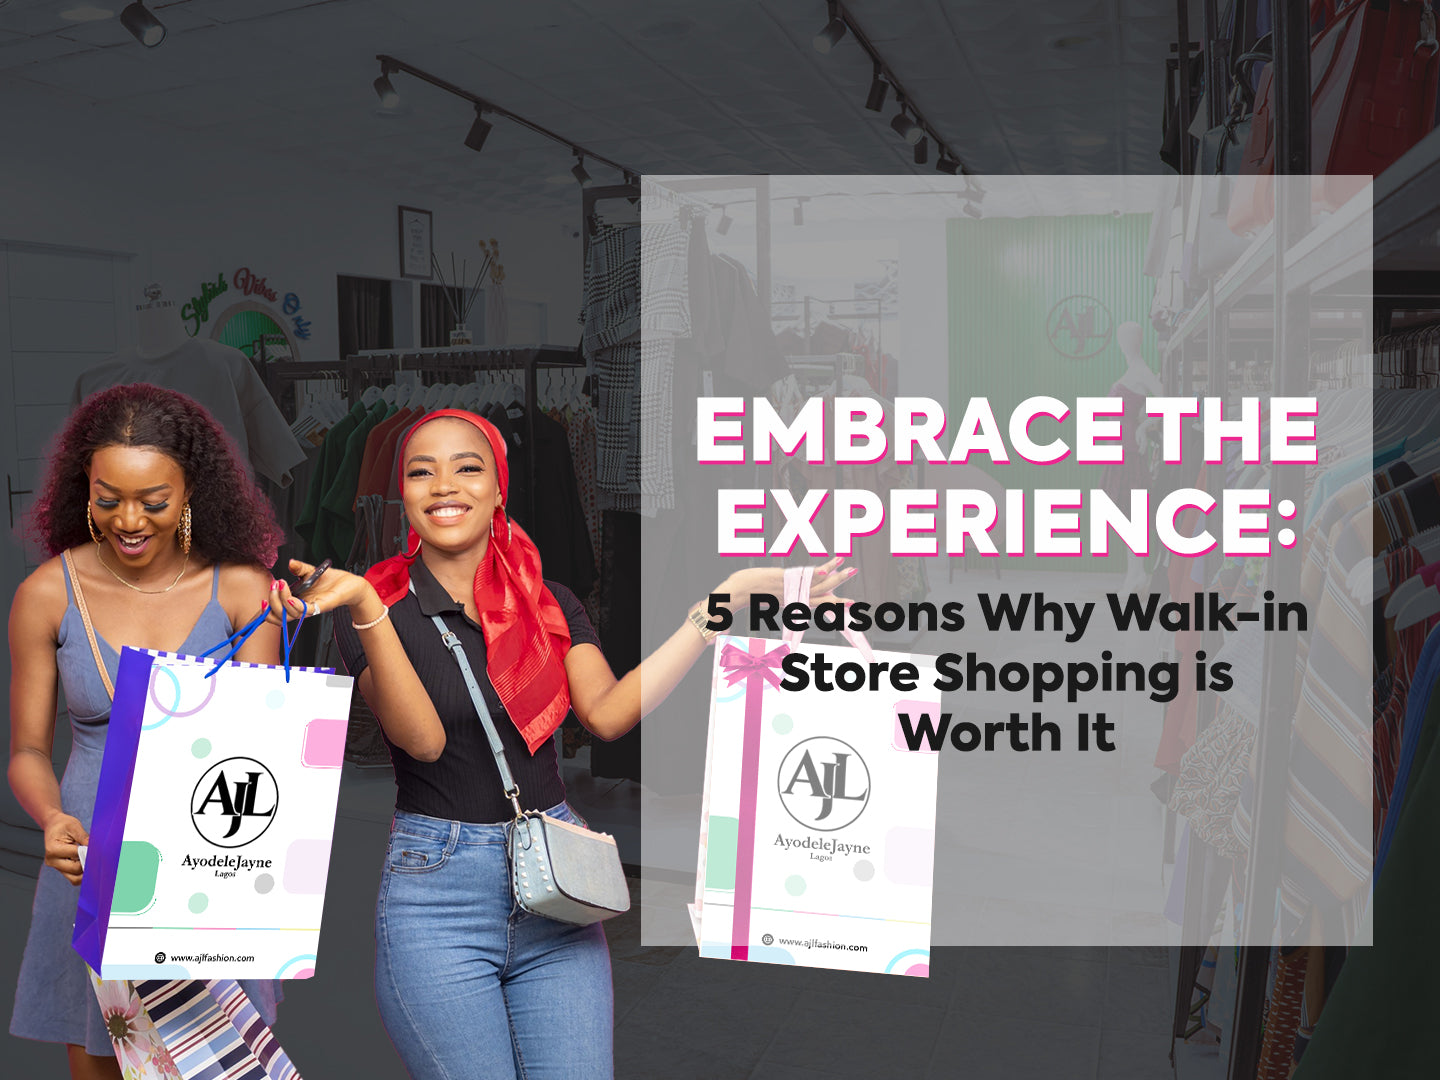 Embrace the Experience: 5 Reasons Why Walk-in Store Shopping is Worth It